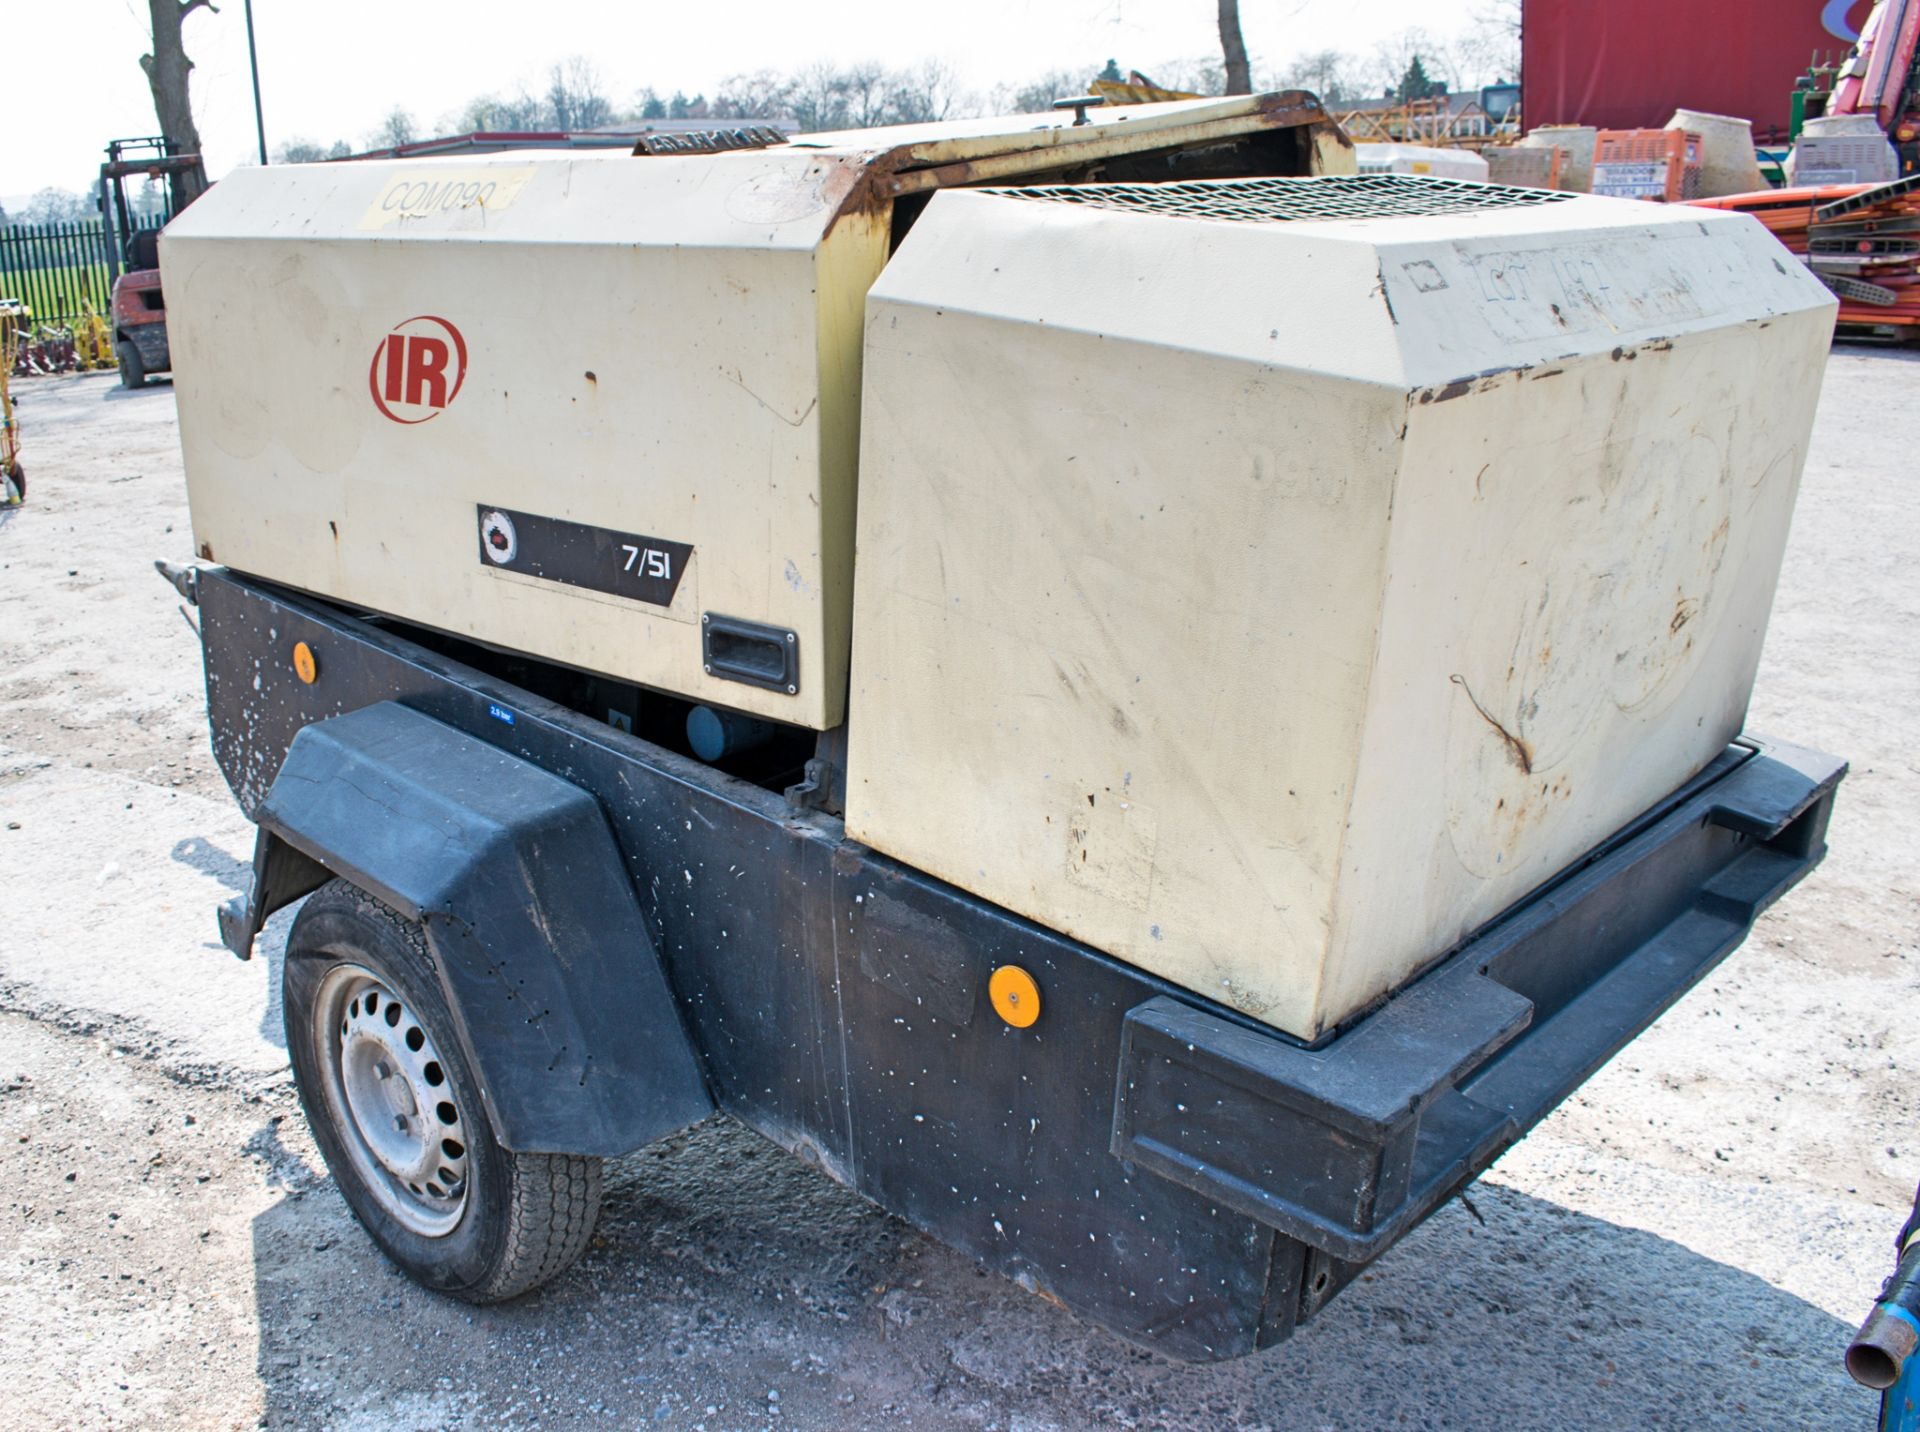 Ingersoll Rand 7/51 diesel driven mobile air compressor Year: 2007 S/N: 442653 Recorded Hours: - Image 2 of 3